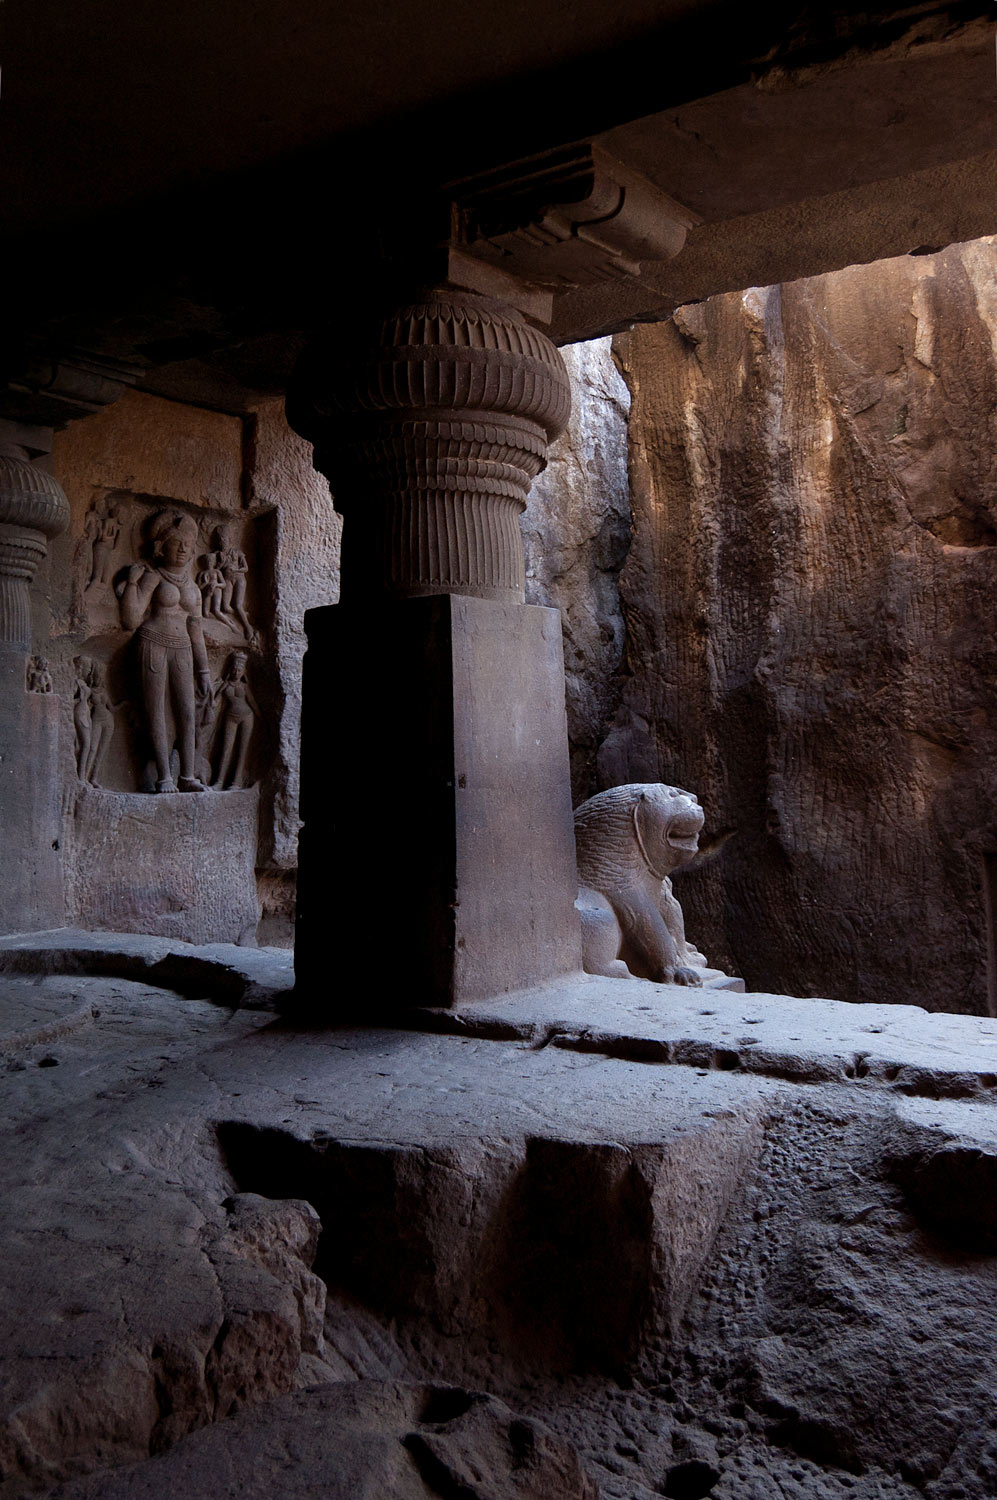 This cave is unusual in that it has a cross axis, similar to the Elephanta cave in Mumbai harbor